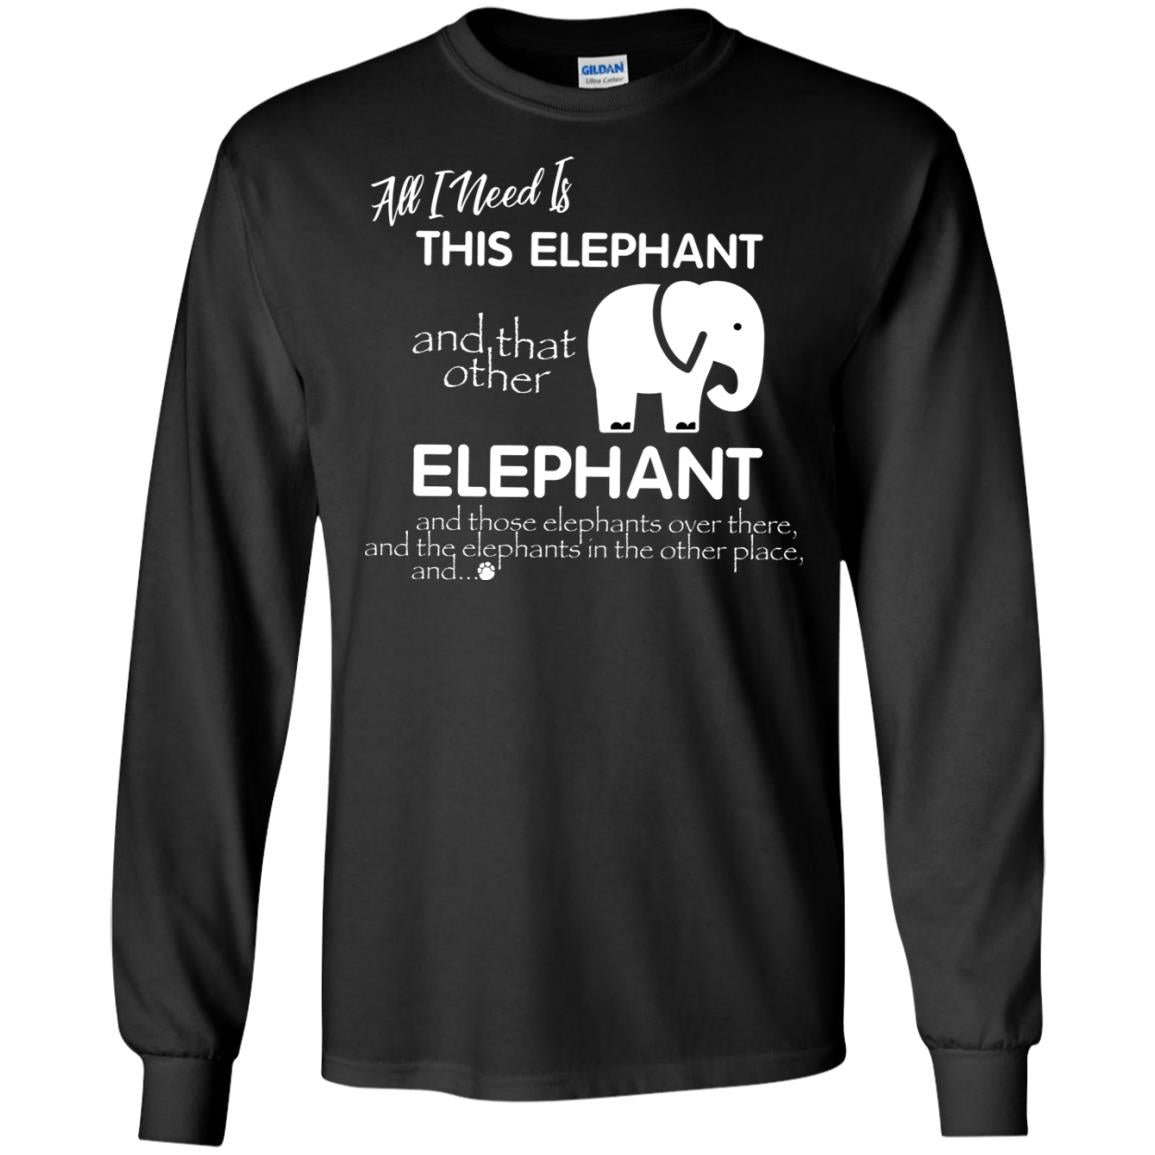 All I Need Is This Elephant And That Other Elephant Shirt For Elephant LoversG240 Gildan LS Ultra Cotton T-Shirt